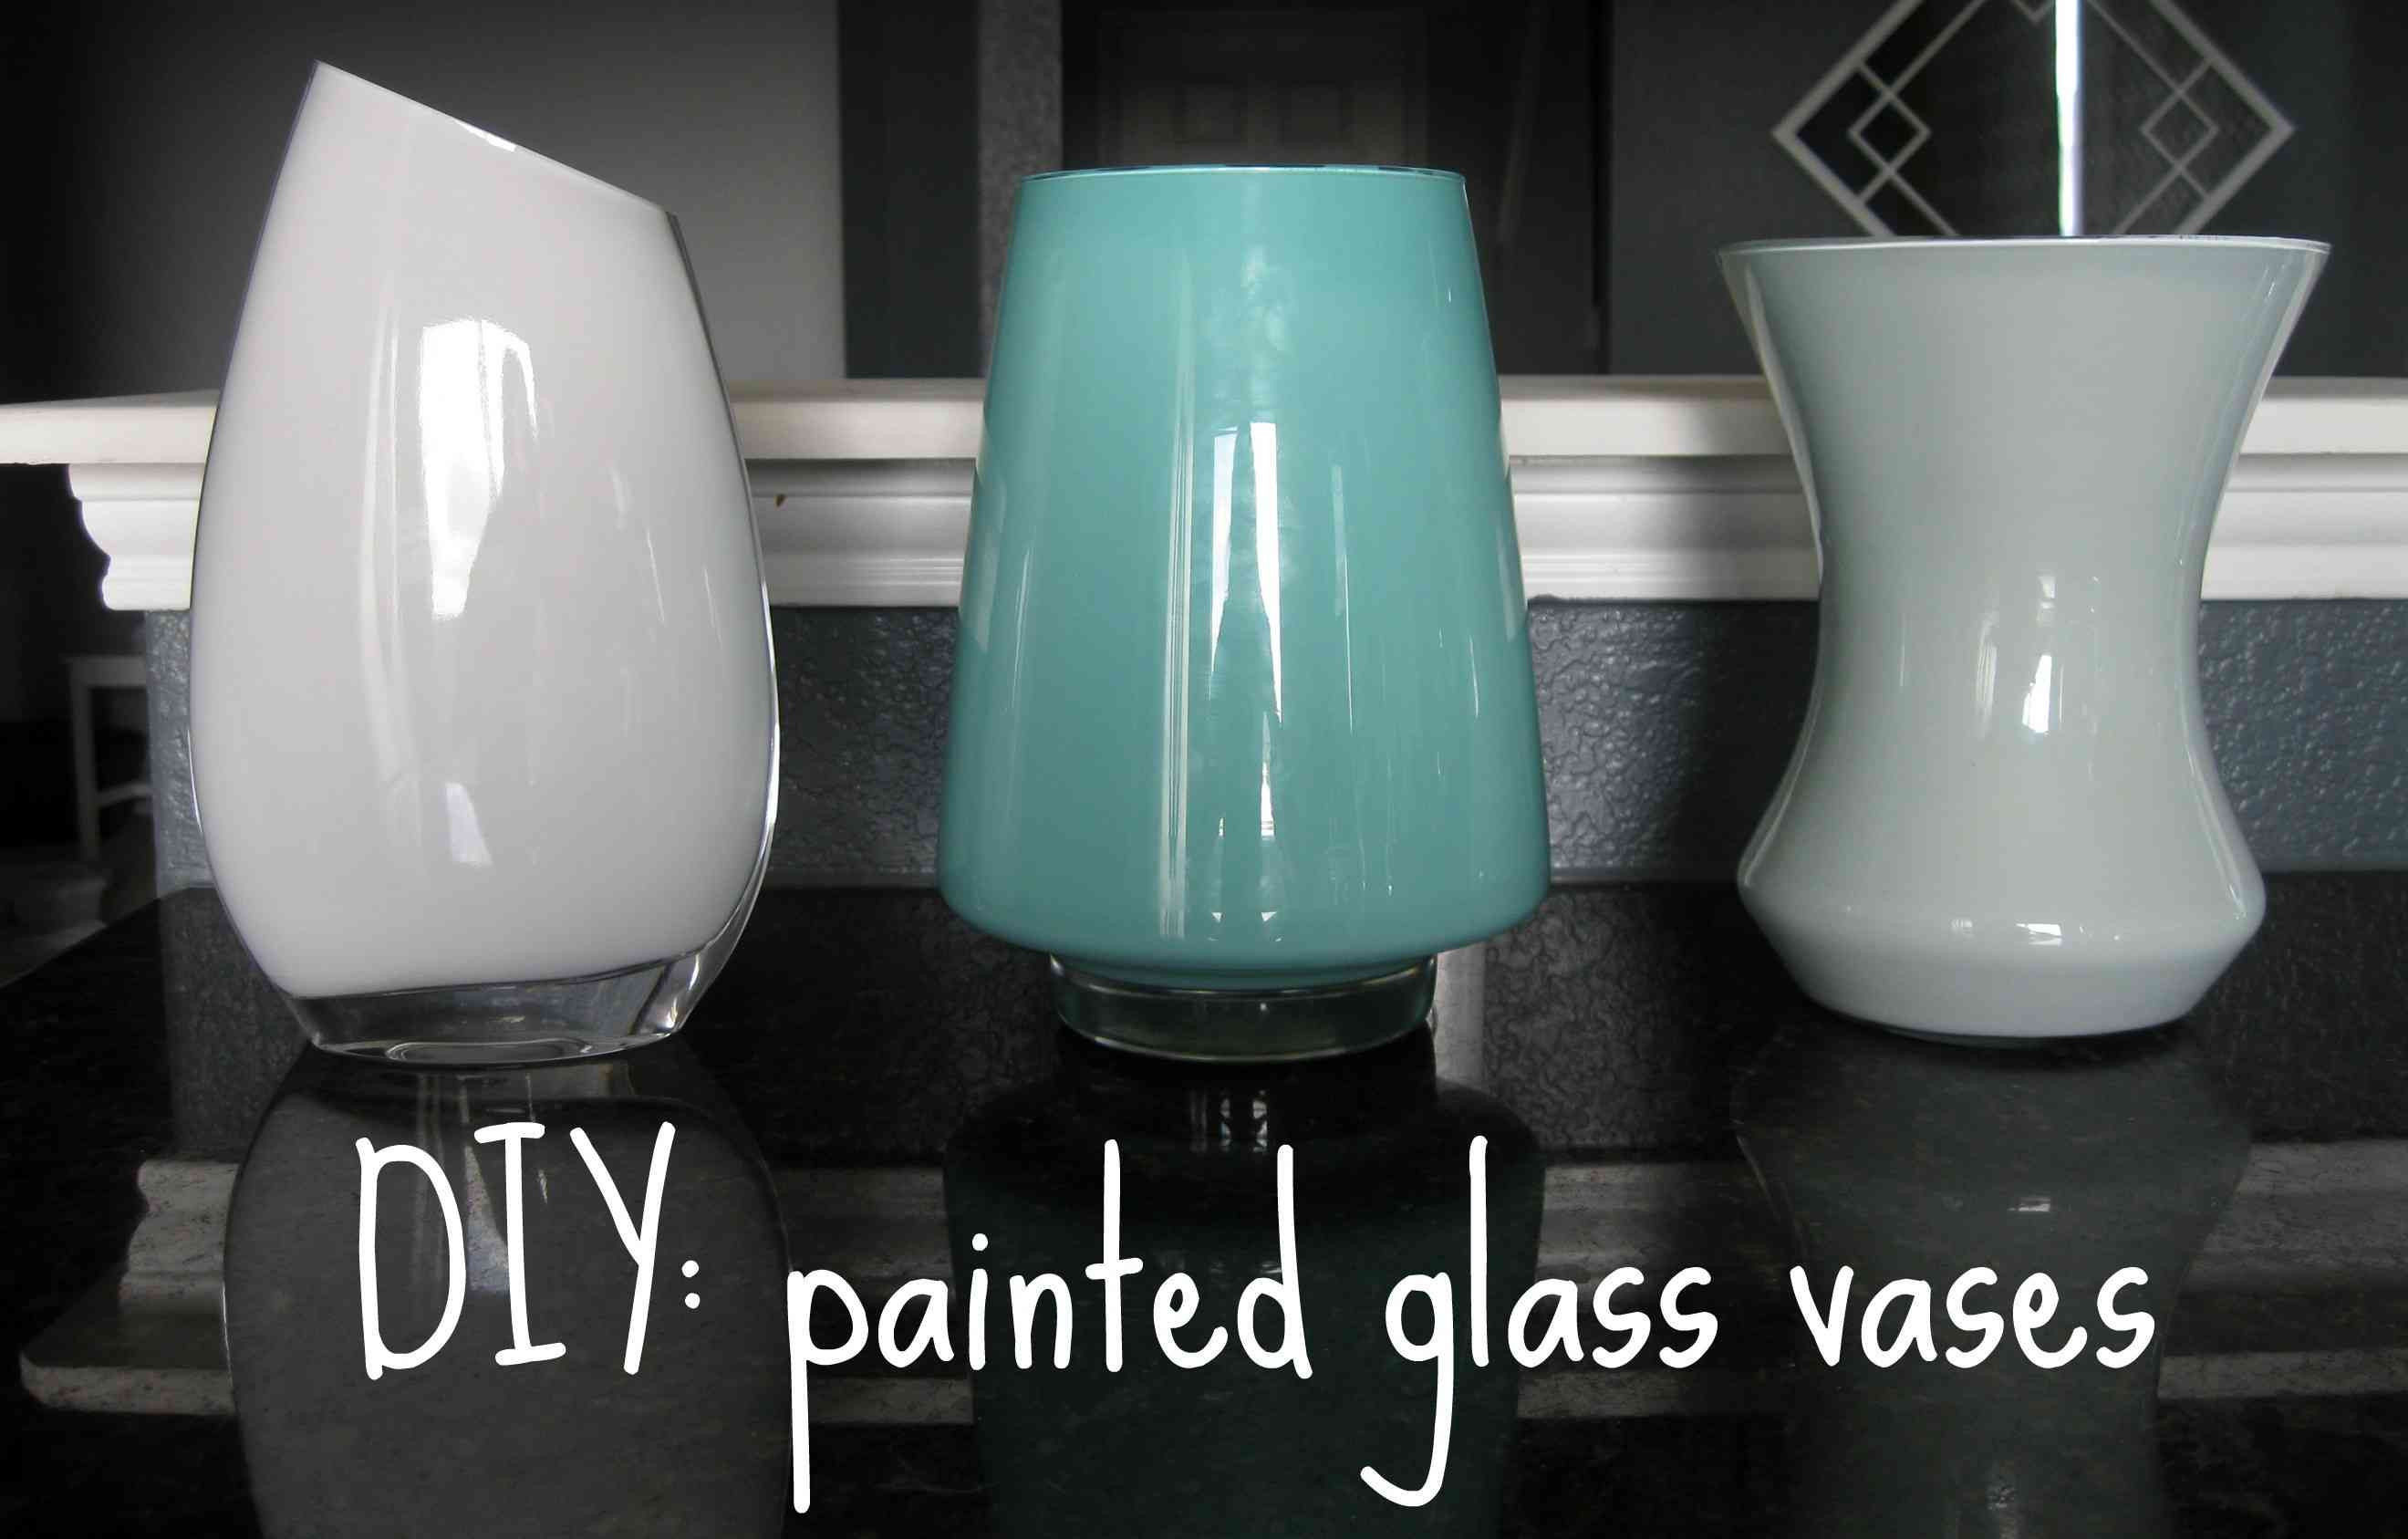 23 Awesome Green Glass Vases for Sale 2024 free download green glass vases for sale of 23 blue crystal vase the weekly world in diy painted glass vasesh vases how to paint vasesi 0d via conejita info